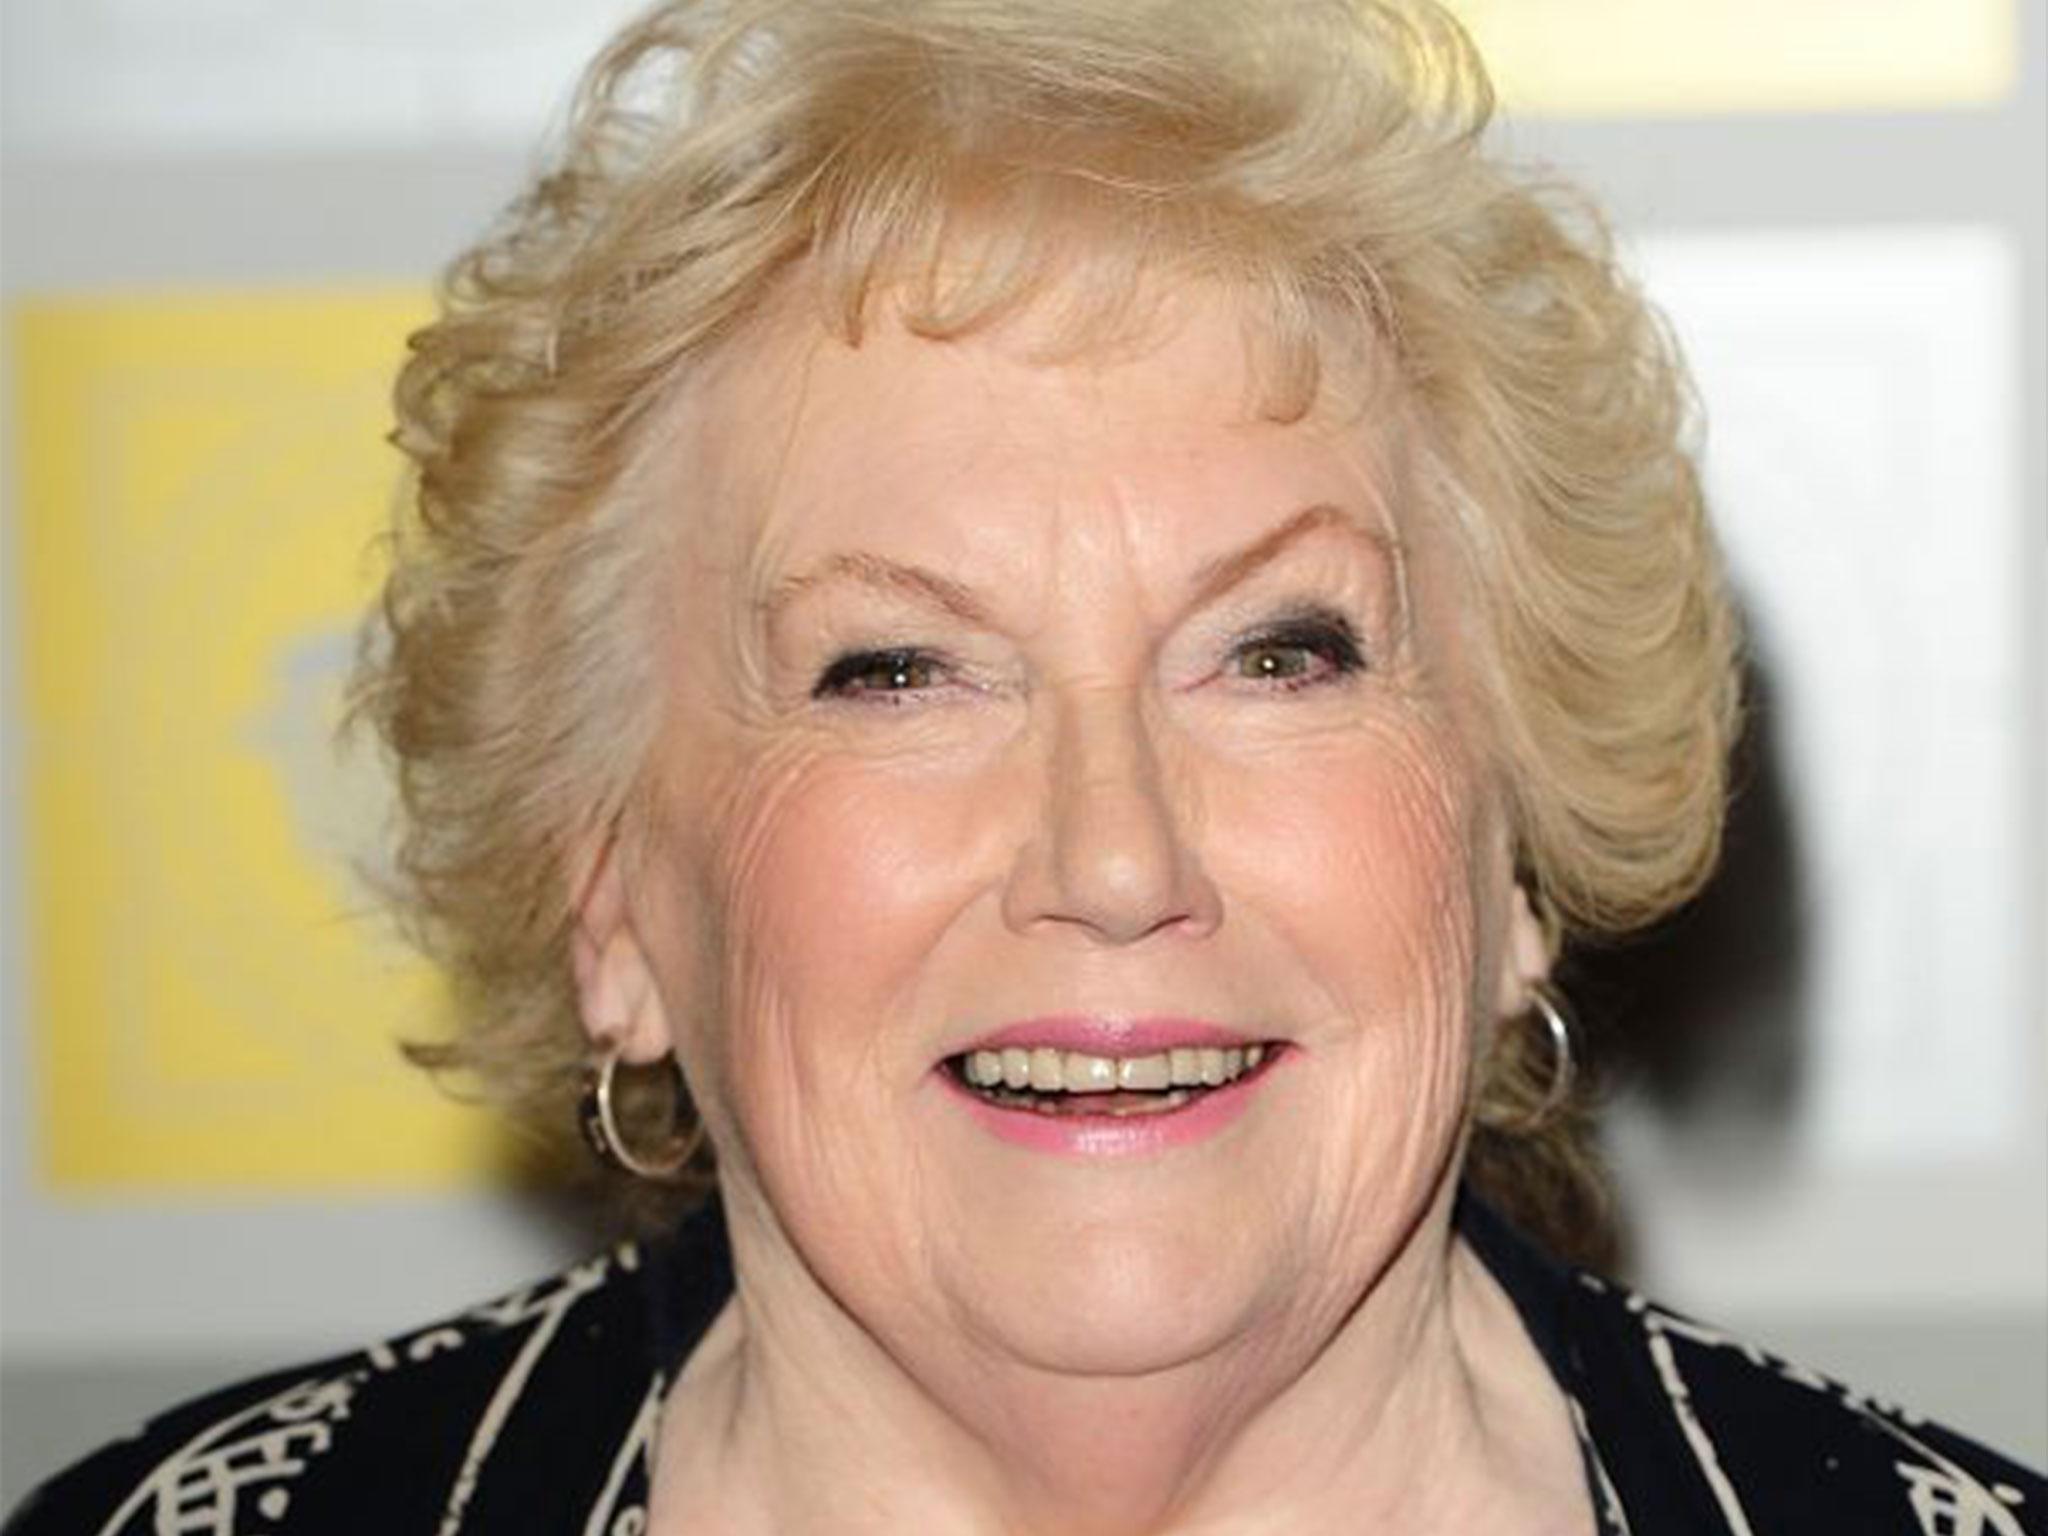 Denise Robertson was diagnosed with pancreatic cancer in February